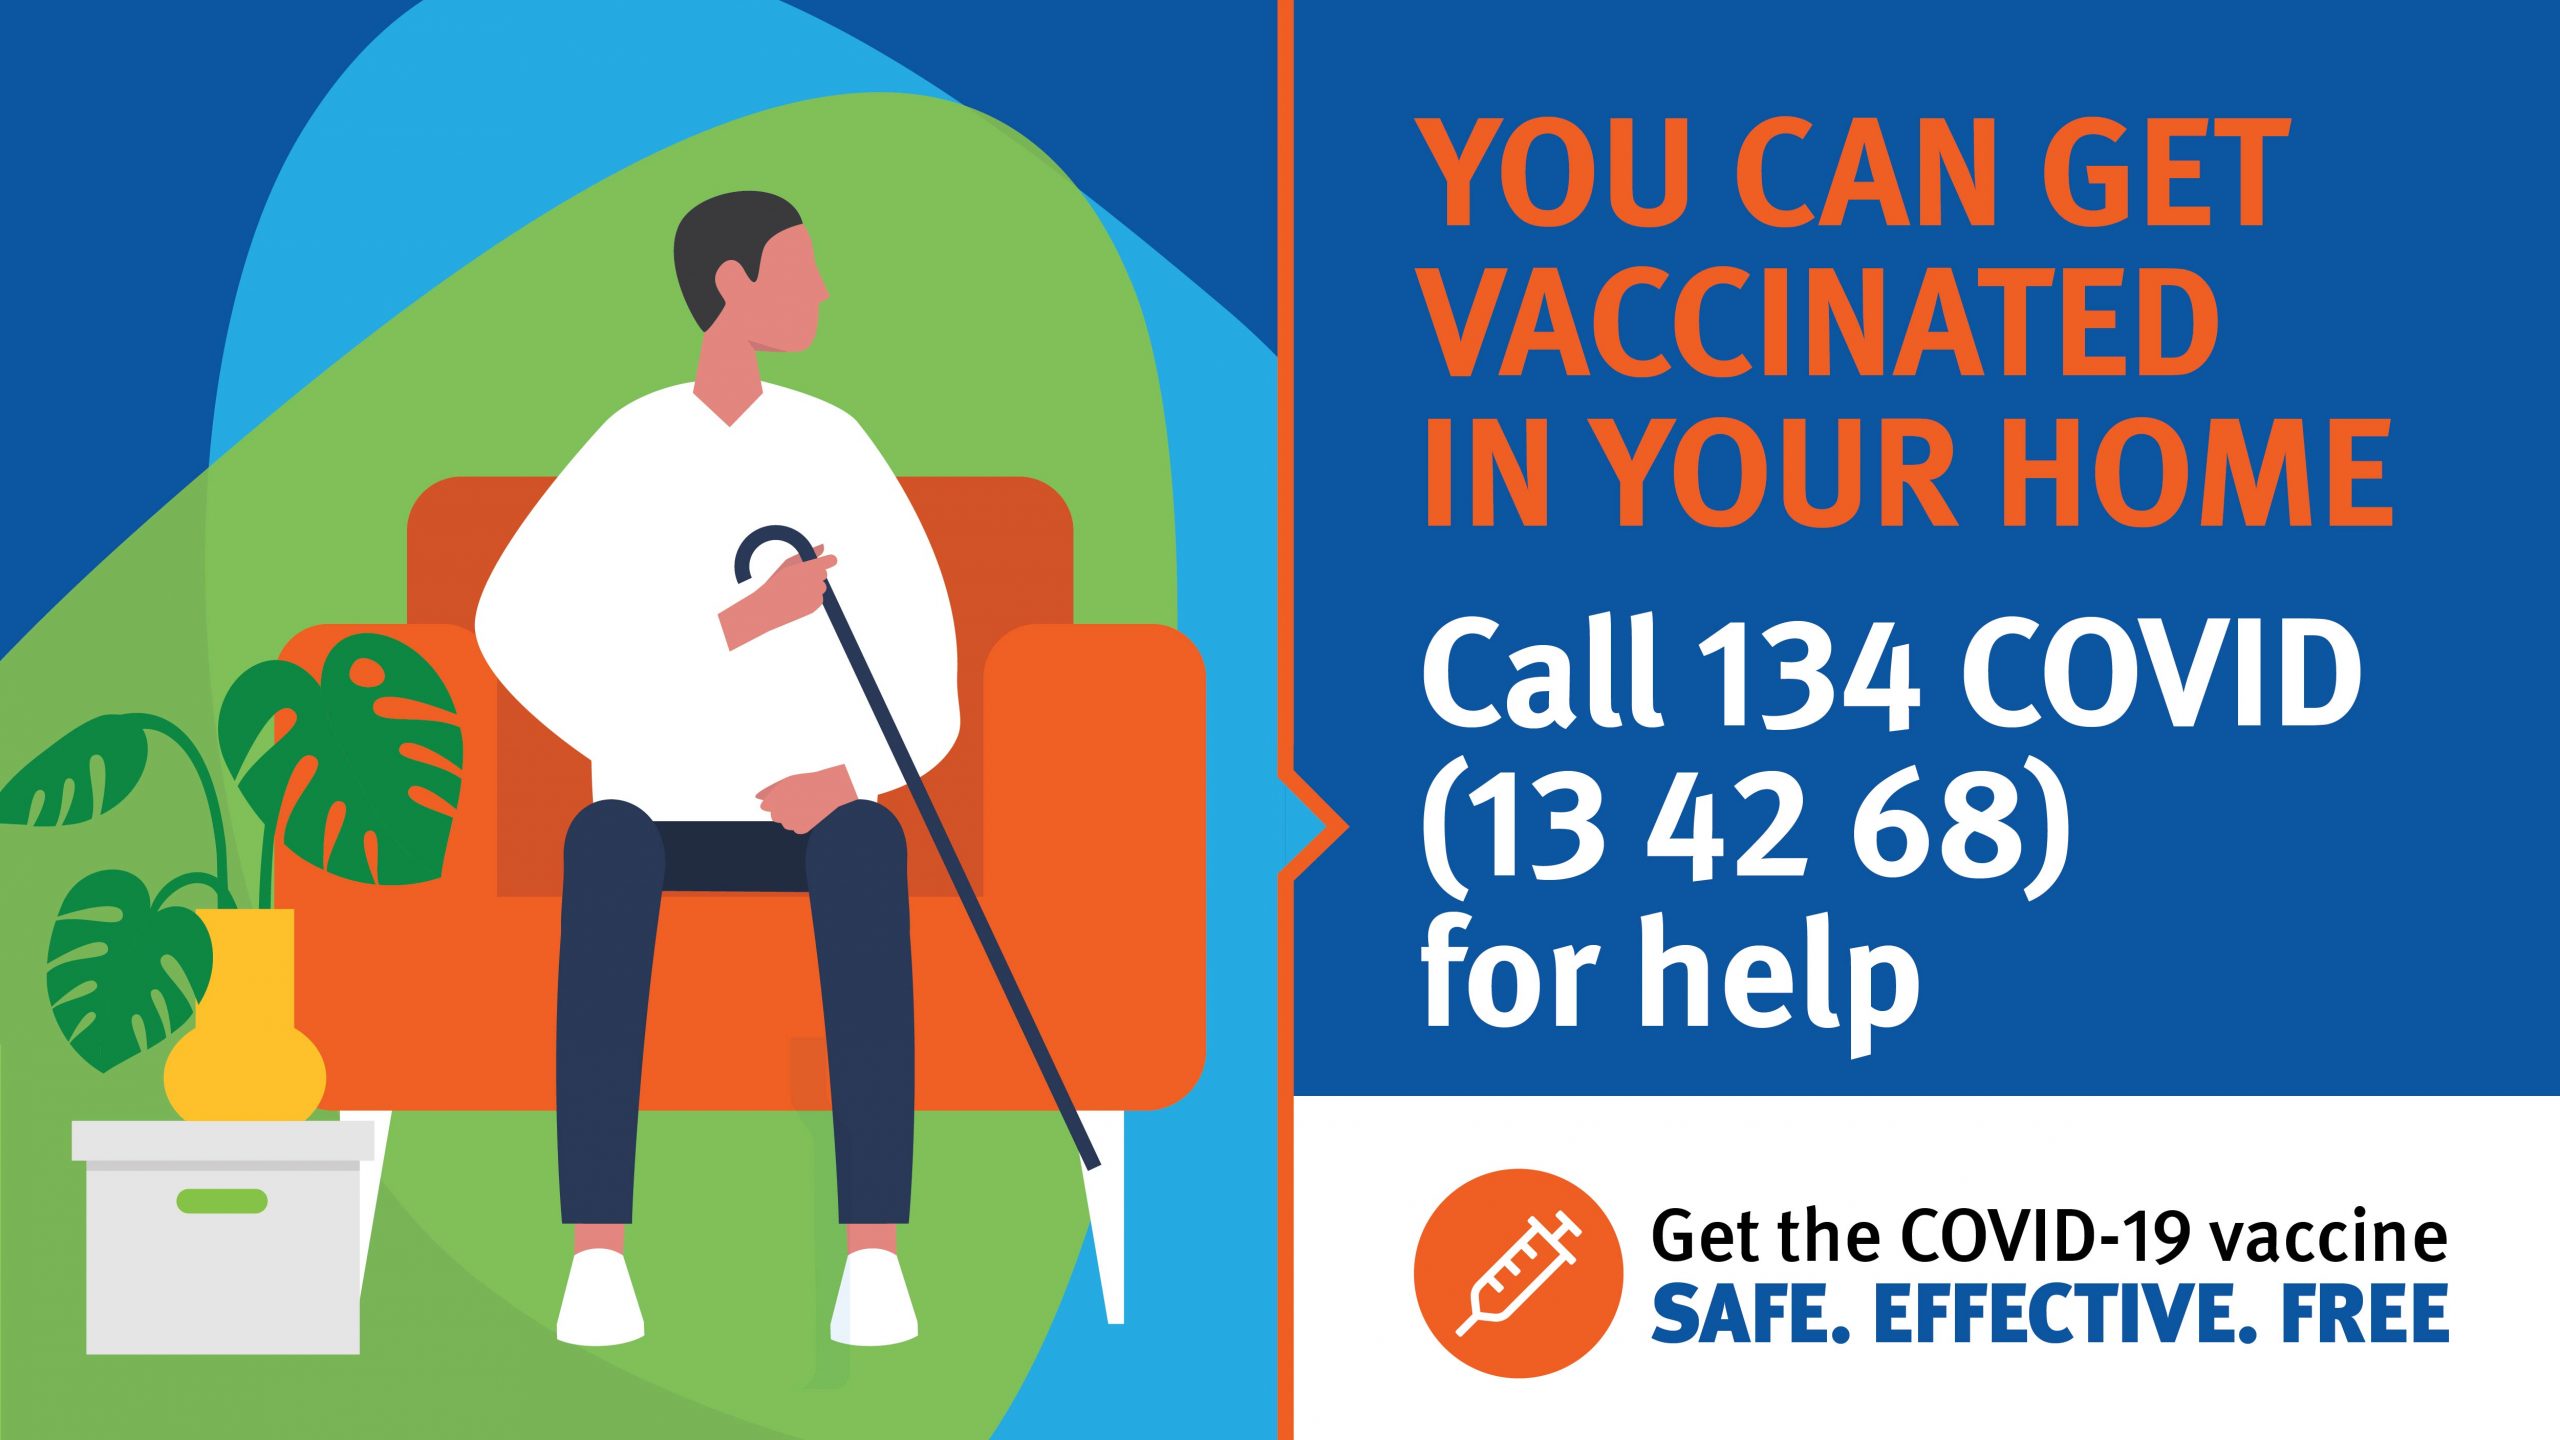 Drawing of a man on his couch in his home with a cane. The text says You can get vaccinated in your home. Call 134 COVID (13 42 68) for help. Get the Covid-19 Vaccine, Safe, Effective, Free